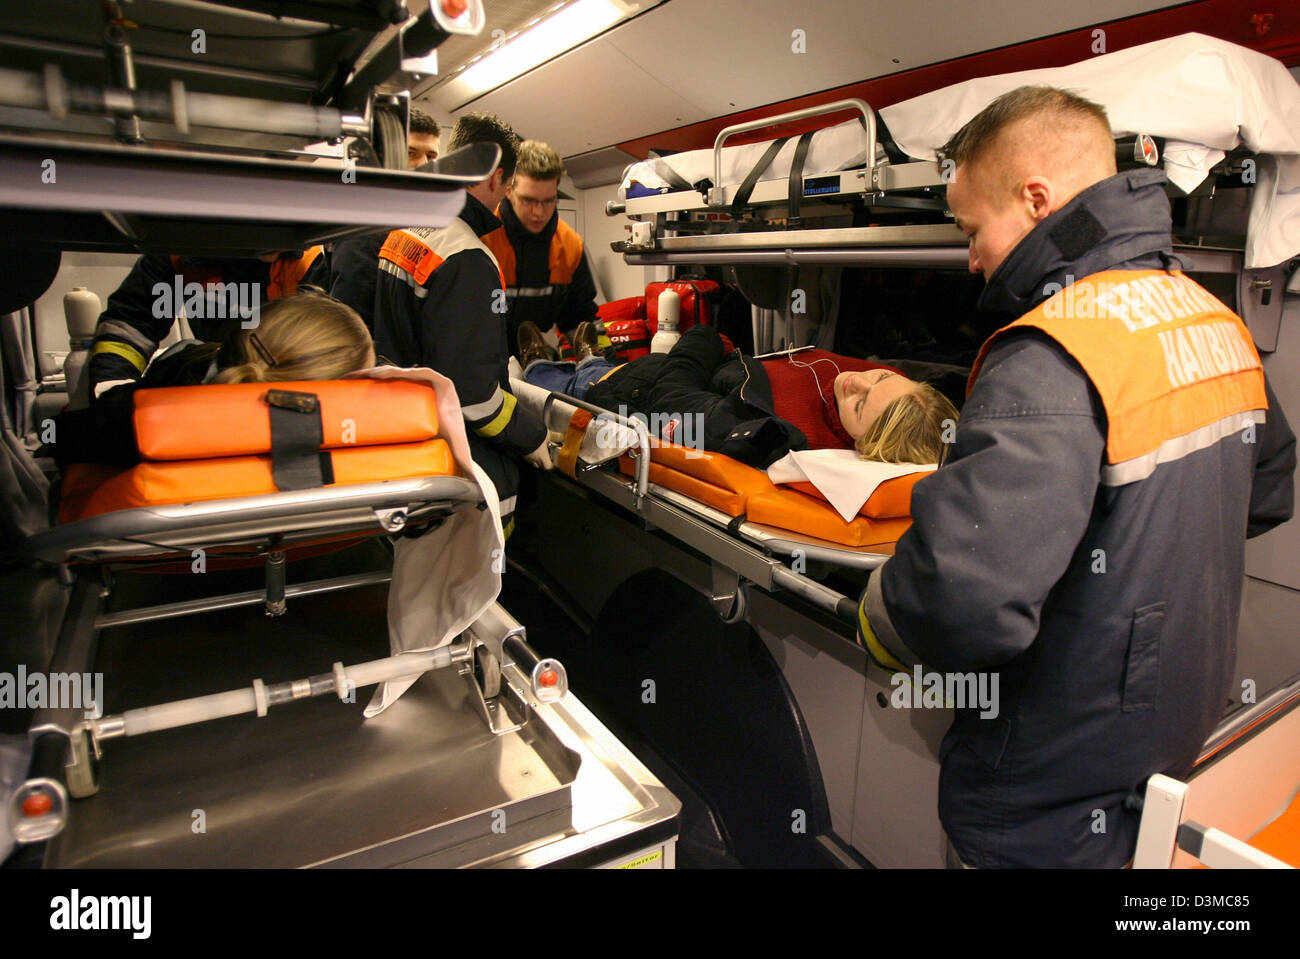 Rescue forces take care of 'injured' participants of an hospital disaster drill in Hamburg, Germany, 25 January 2006. The scenario for the practise conformed to 50 injured people after two bombings in Hamburg. According to the local health authority terrorist bombings in two public-transport busses were assumed. The bombs shall have been so-called dirty bombs unleashing radioactive Stock Photo